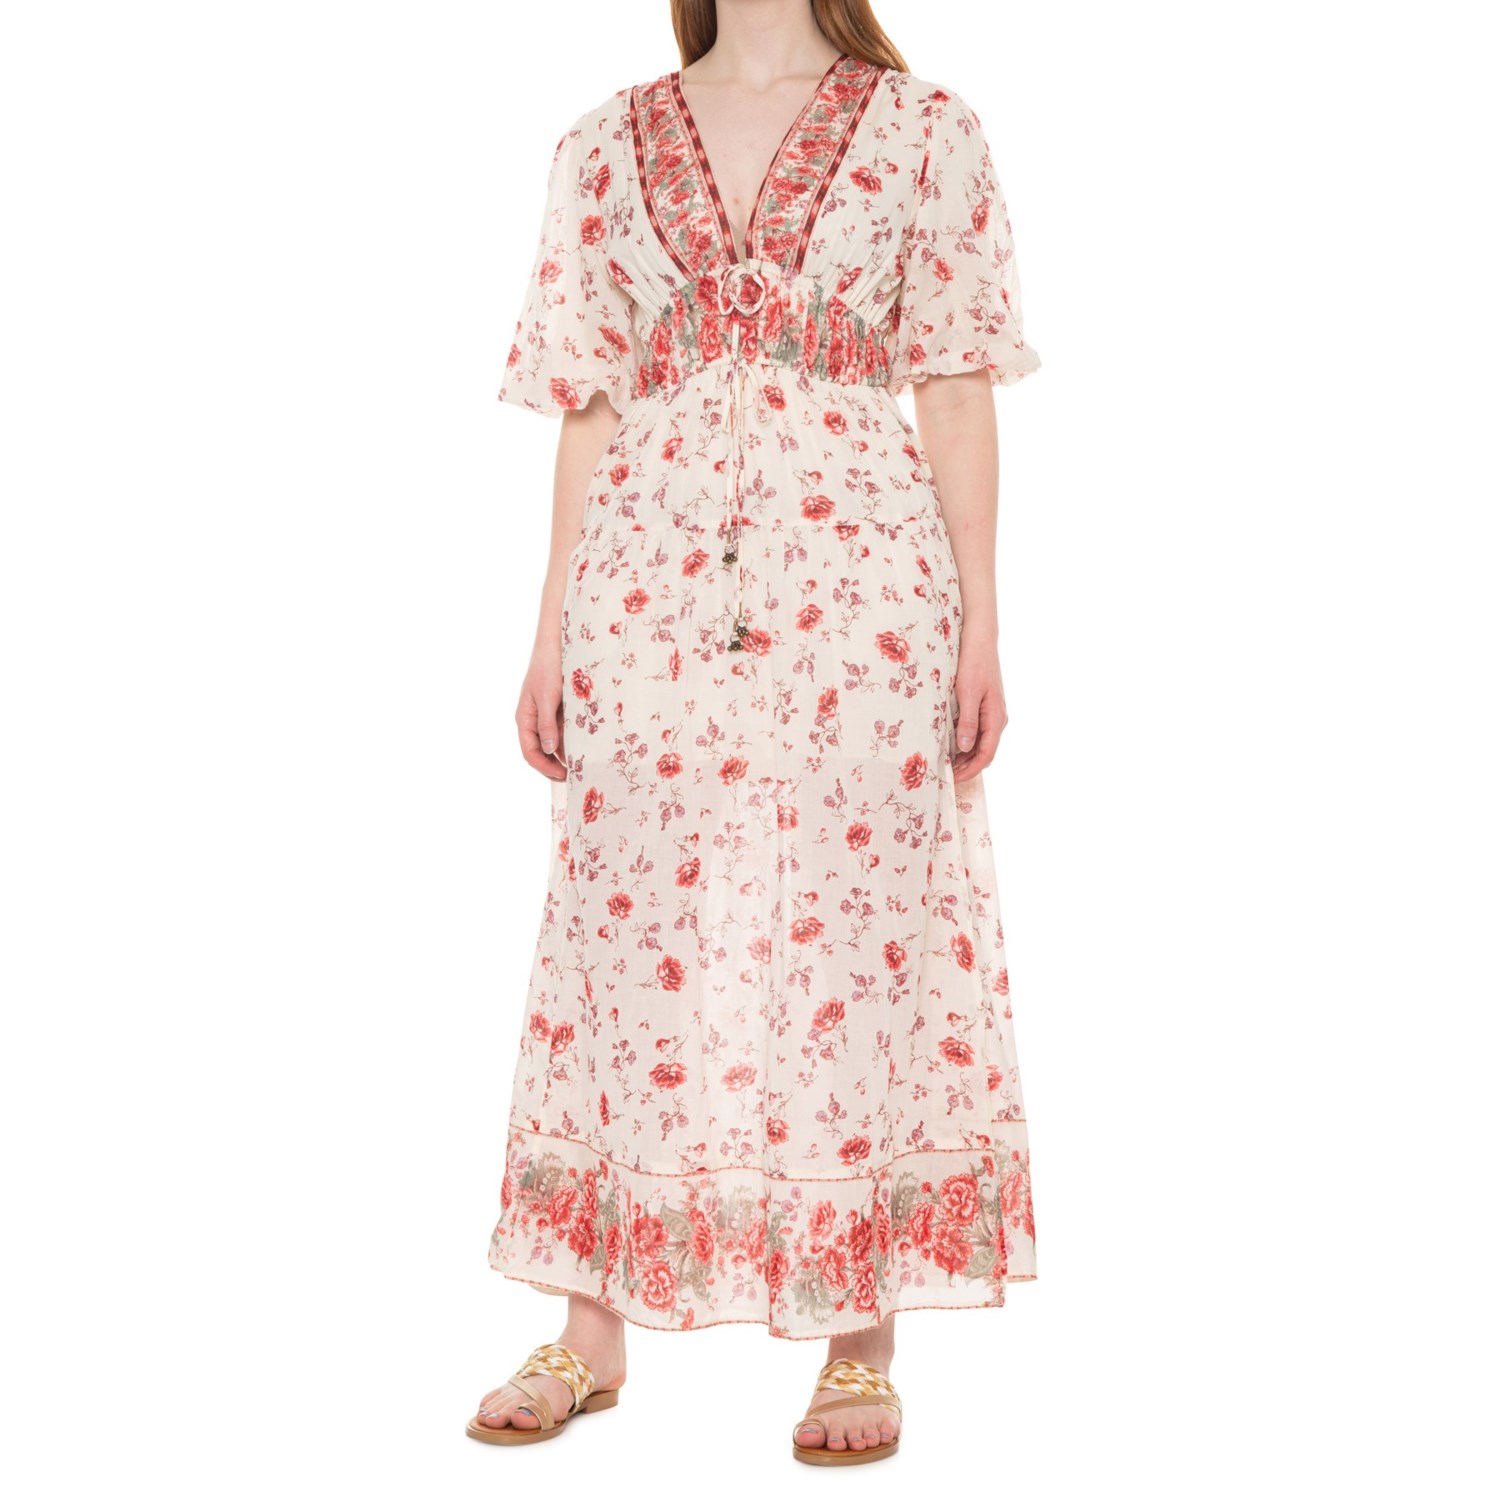 Free People Lysette Maxi Dress - Elbow Sleeve - Save 76%